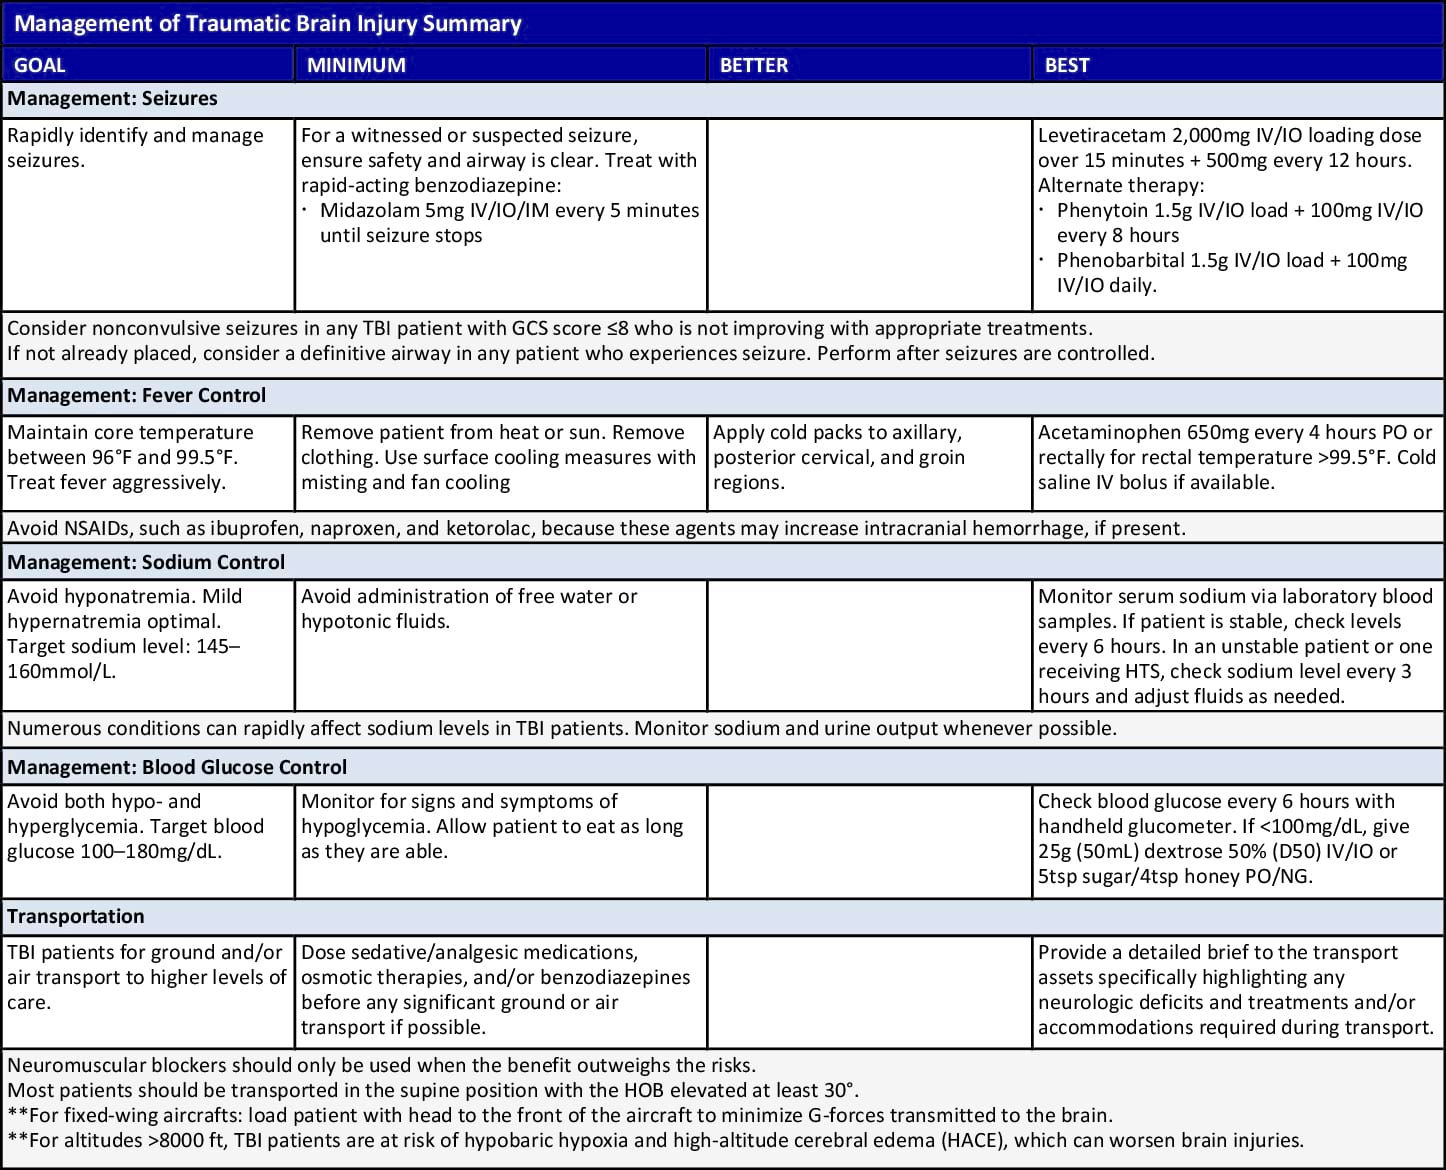 Management Of Traumatic Brain Injury Summary Table, Part 2